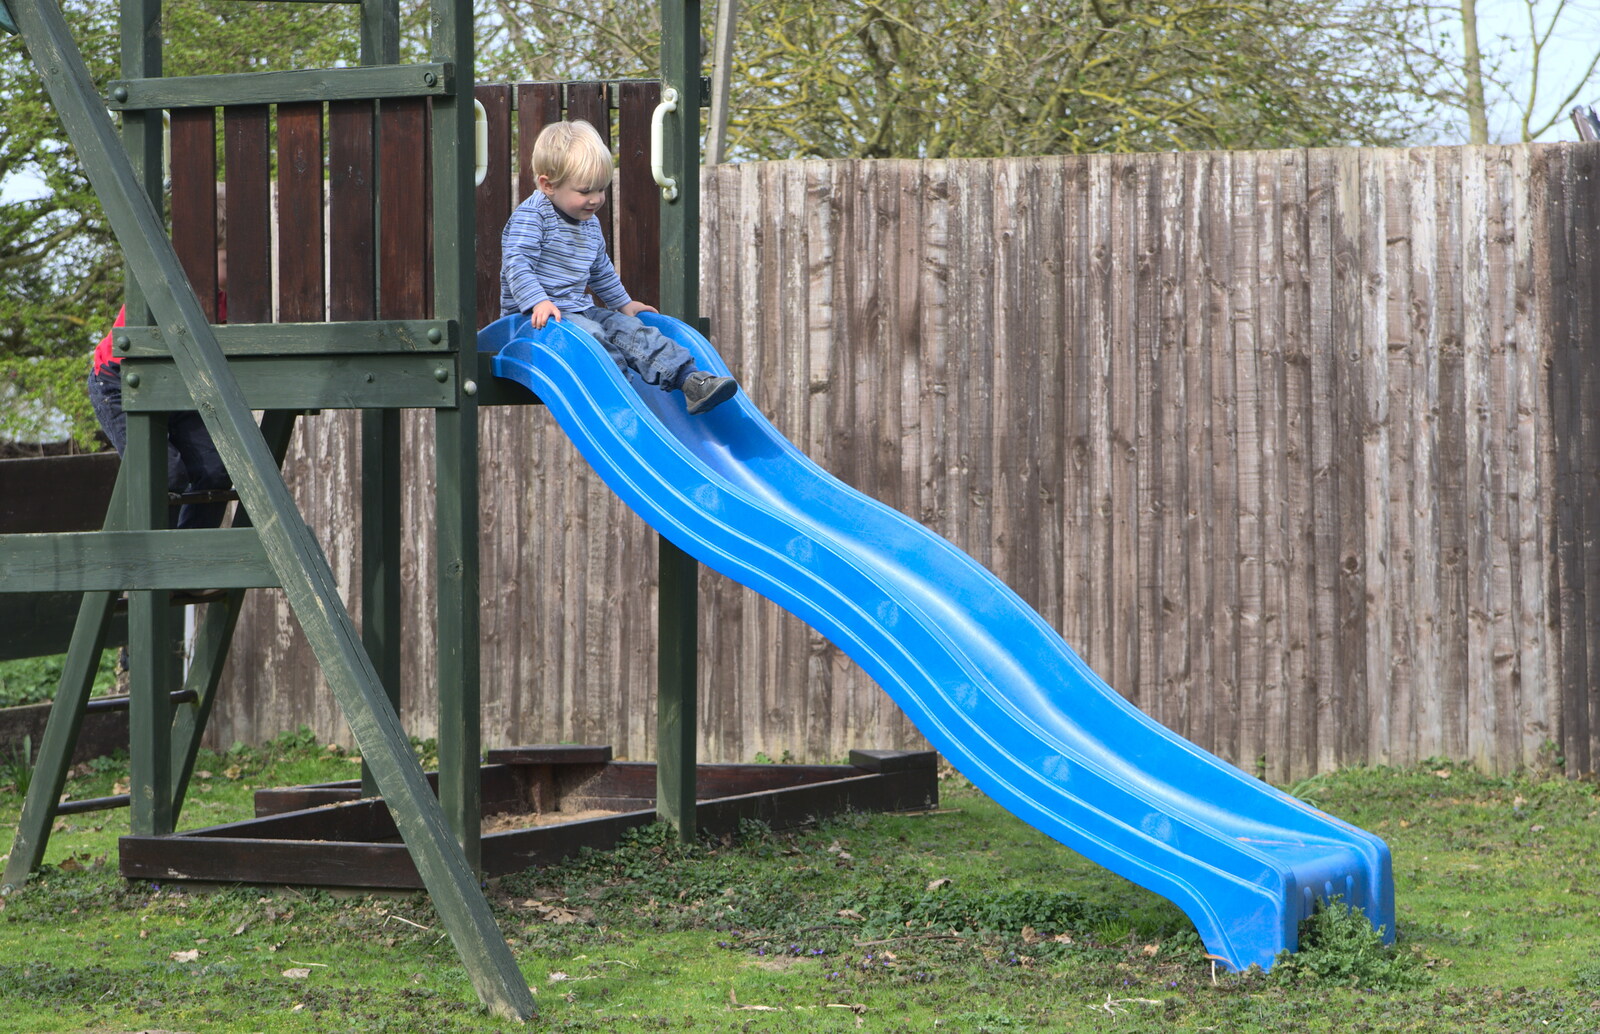 Harry has a slide from On Being Two: Harry's Birthday, Brome, Suffolk - 28th March 2014